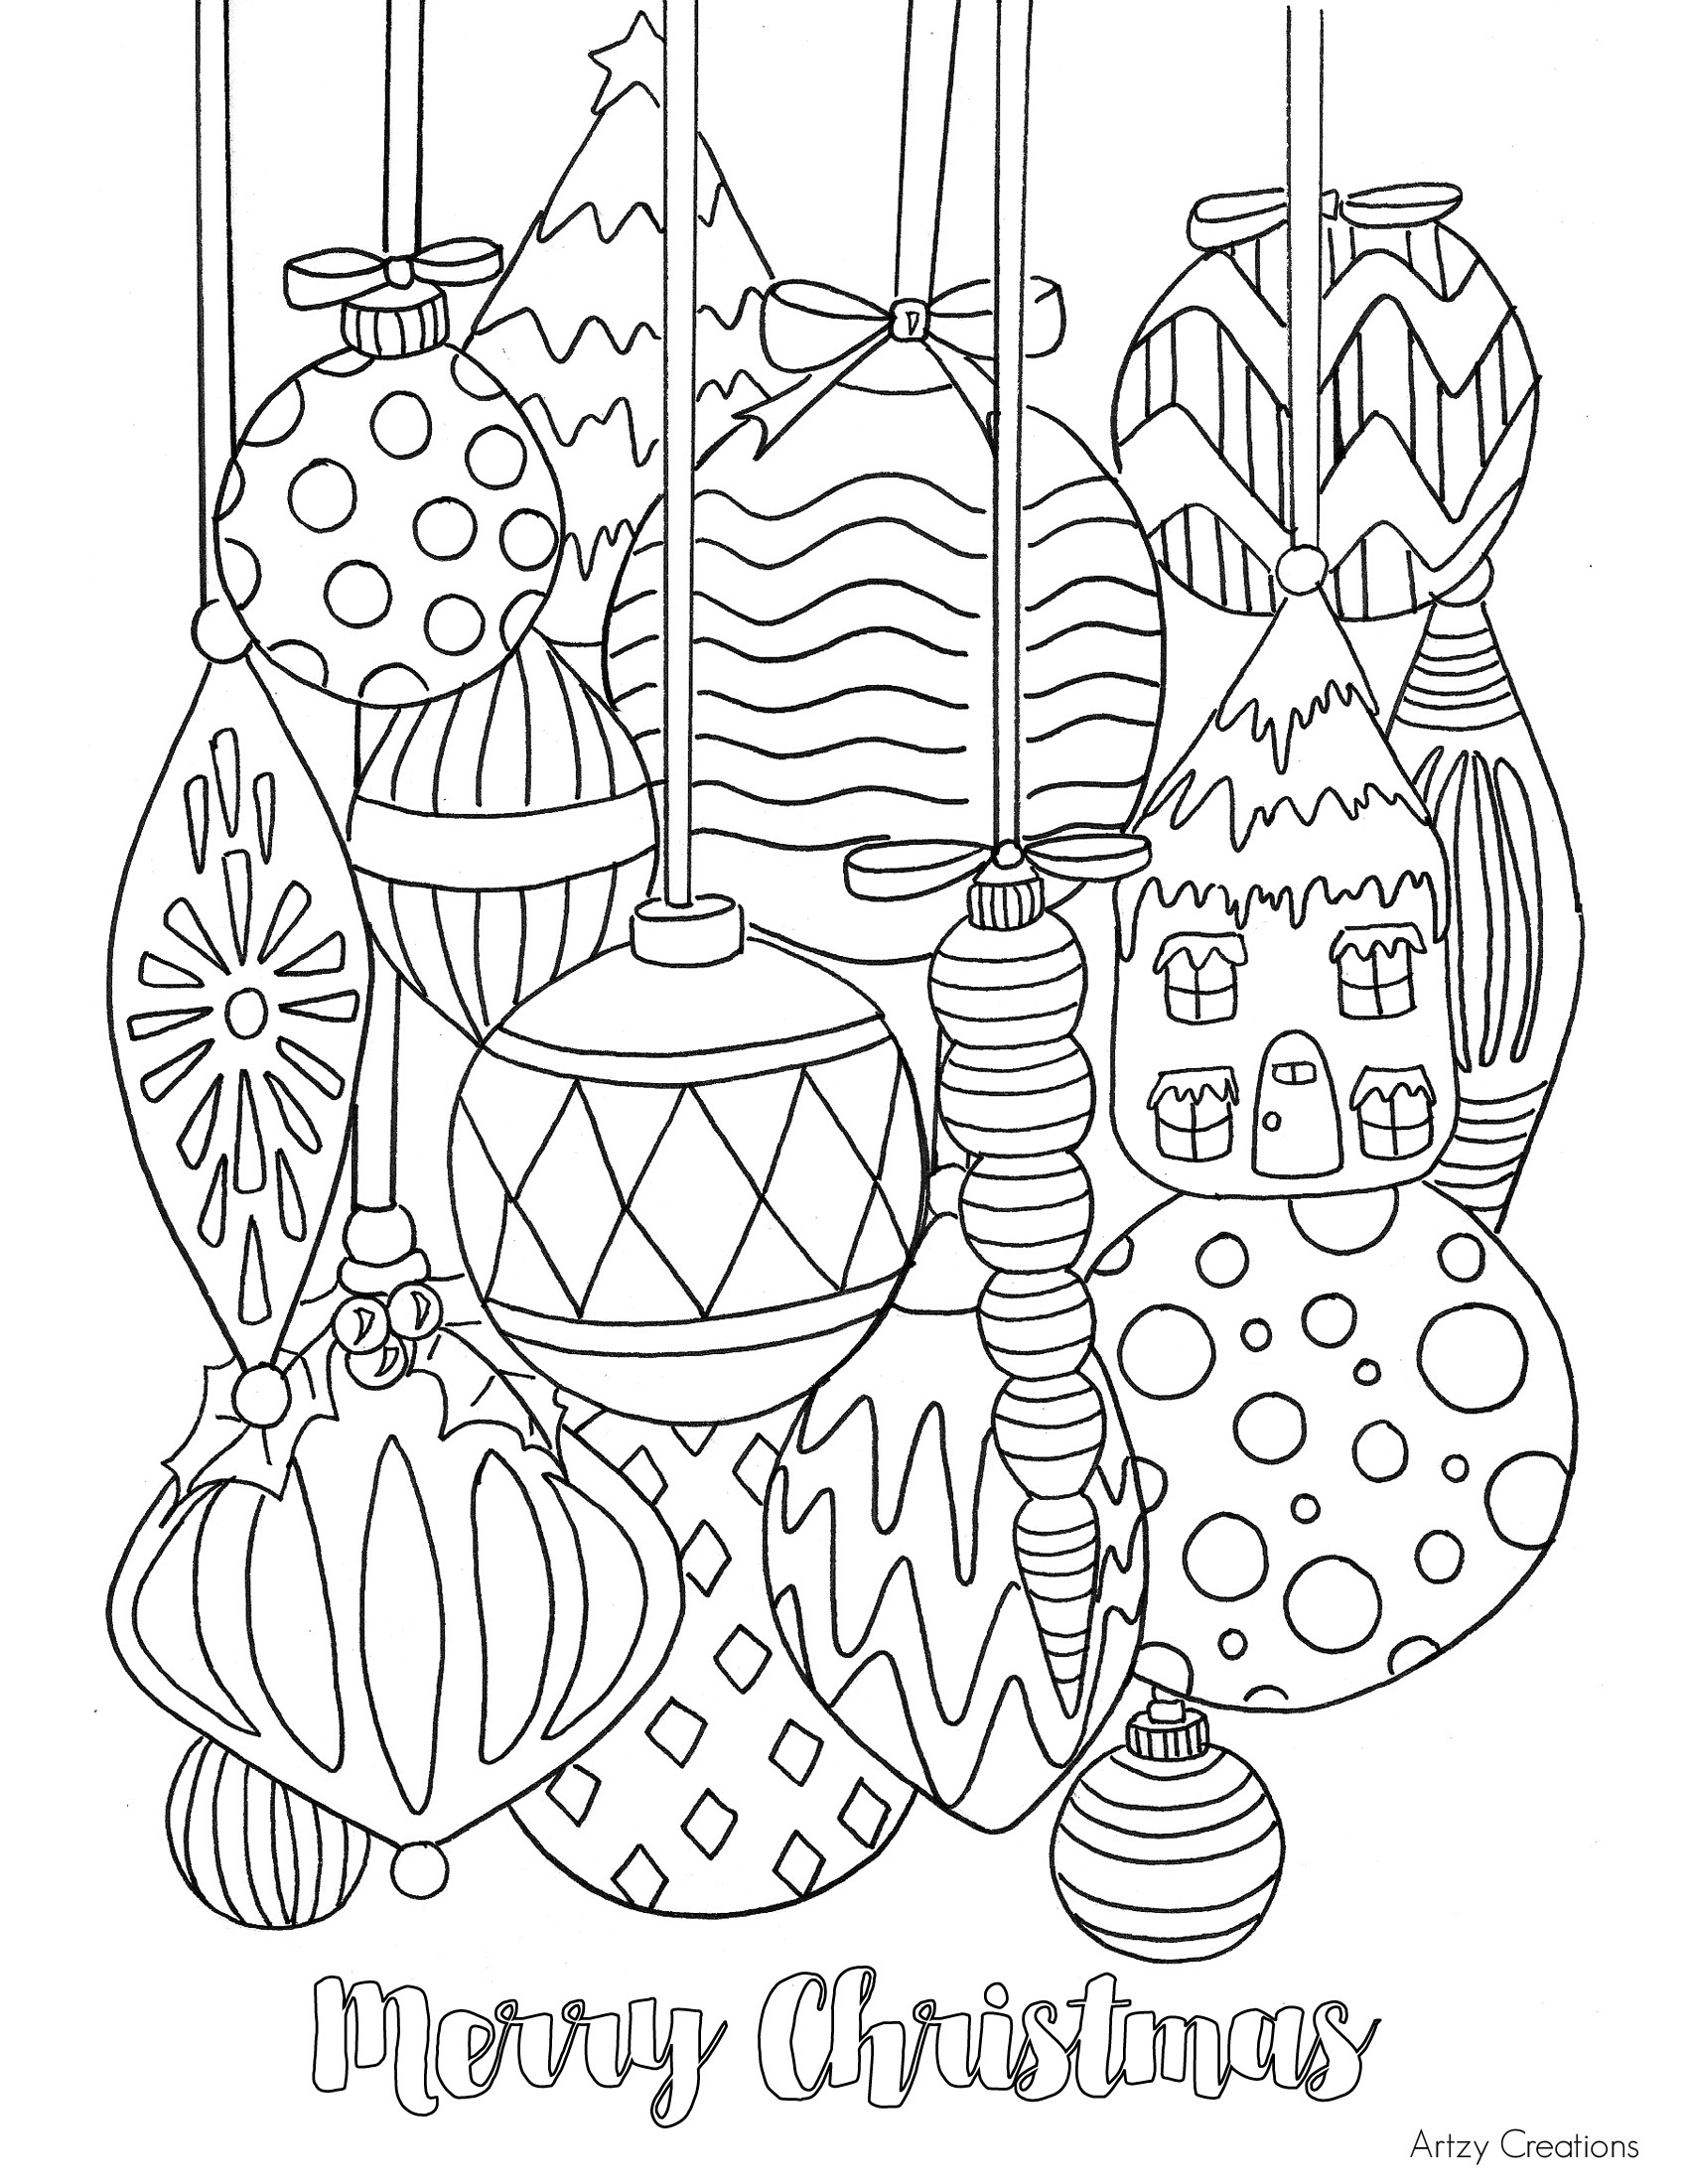 Word Coloring Page Generator Word Coloring Page Generator Inspirational People Coloring Pages Mr